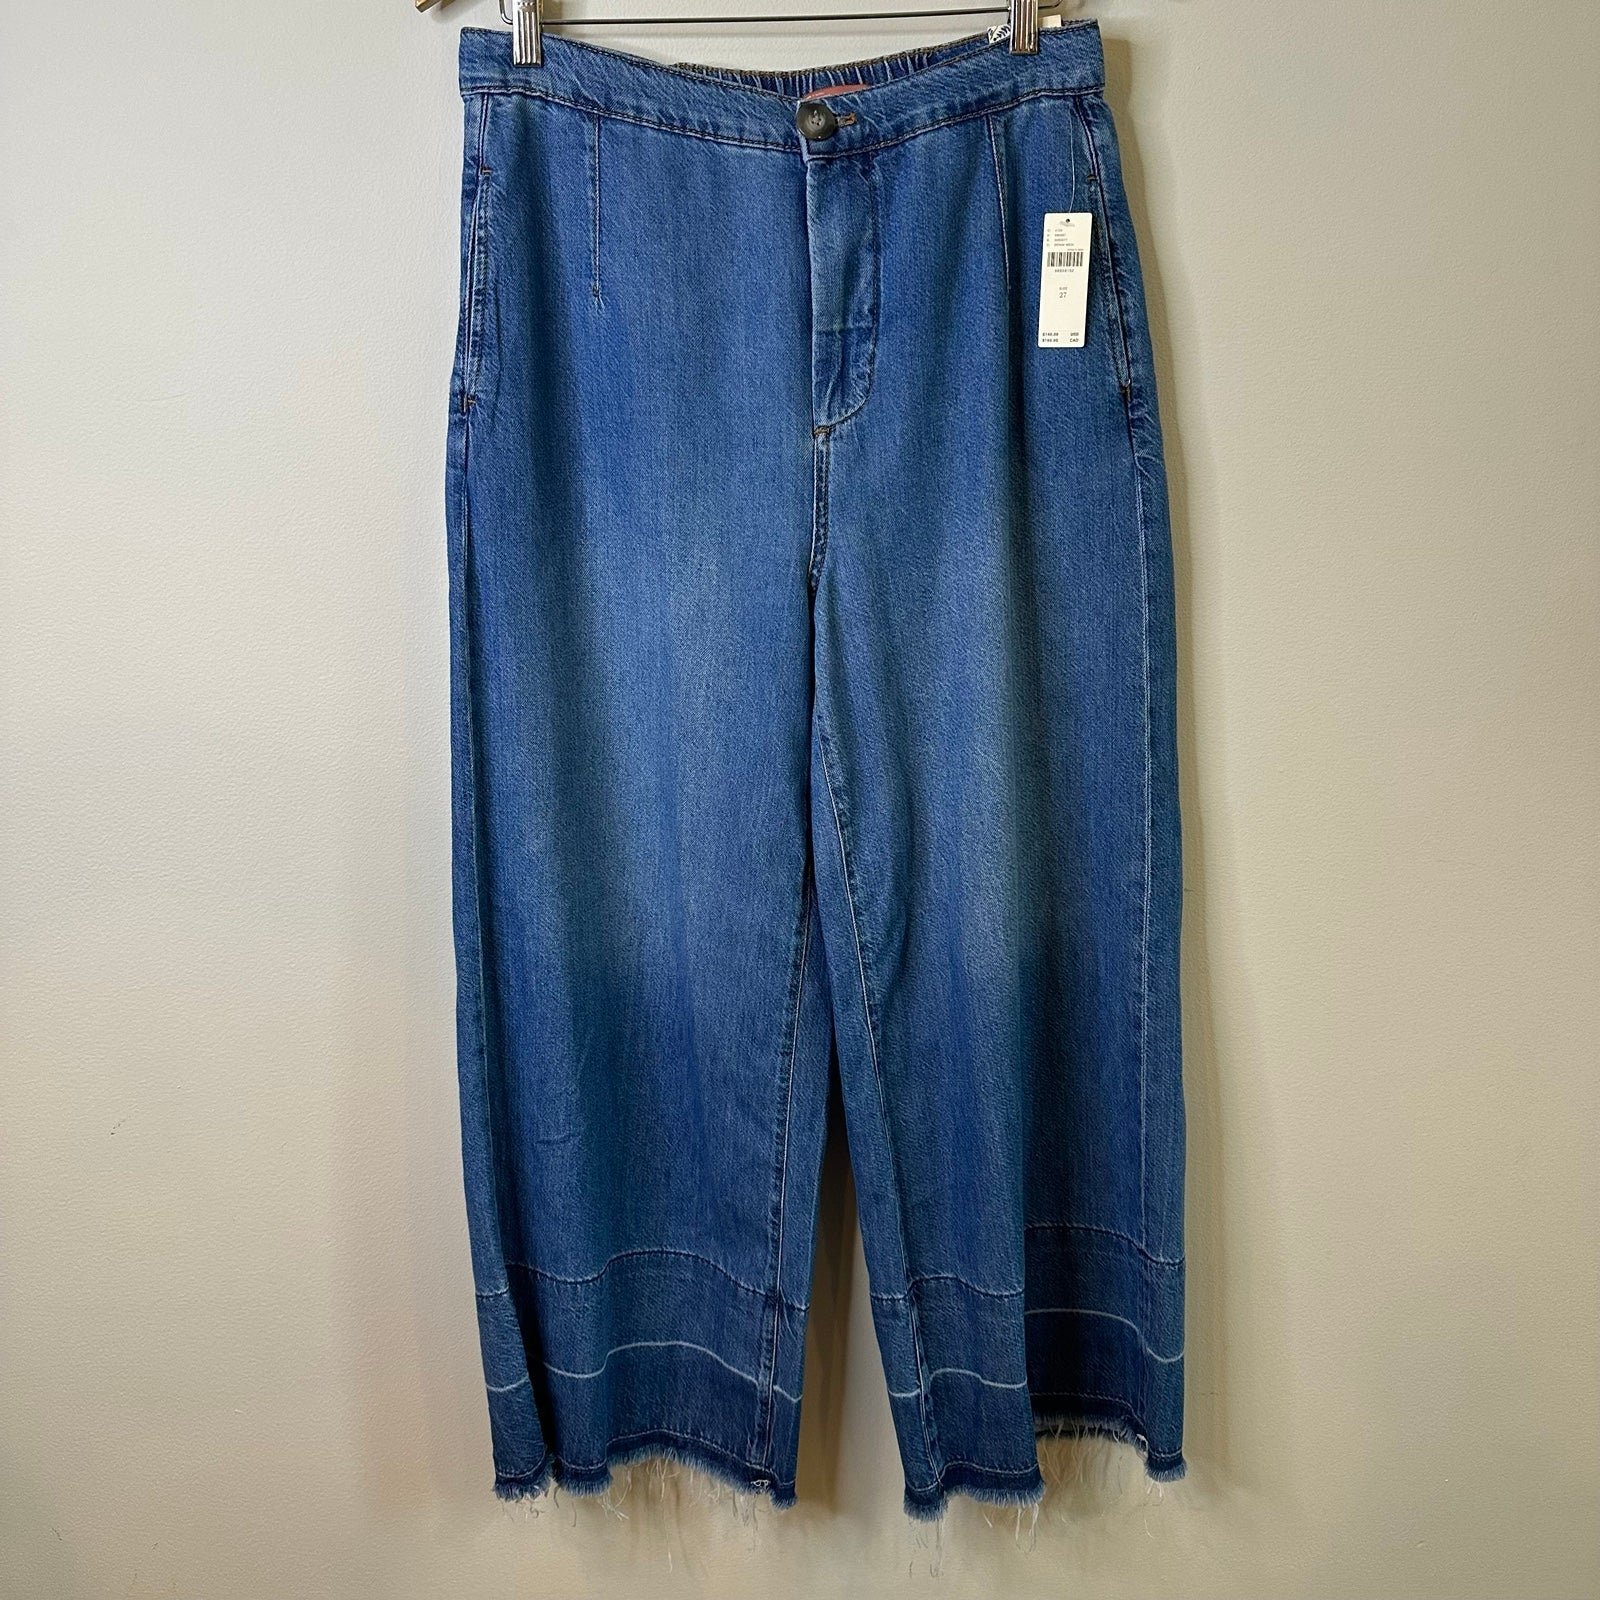 the Lowest price Anthropologie Pilcro Castaway High-Rise Jeans NEW Size 27 Nydh4Io4j hot sale